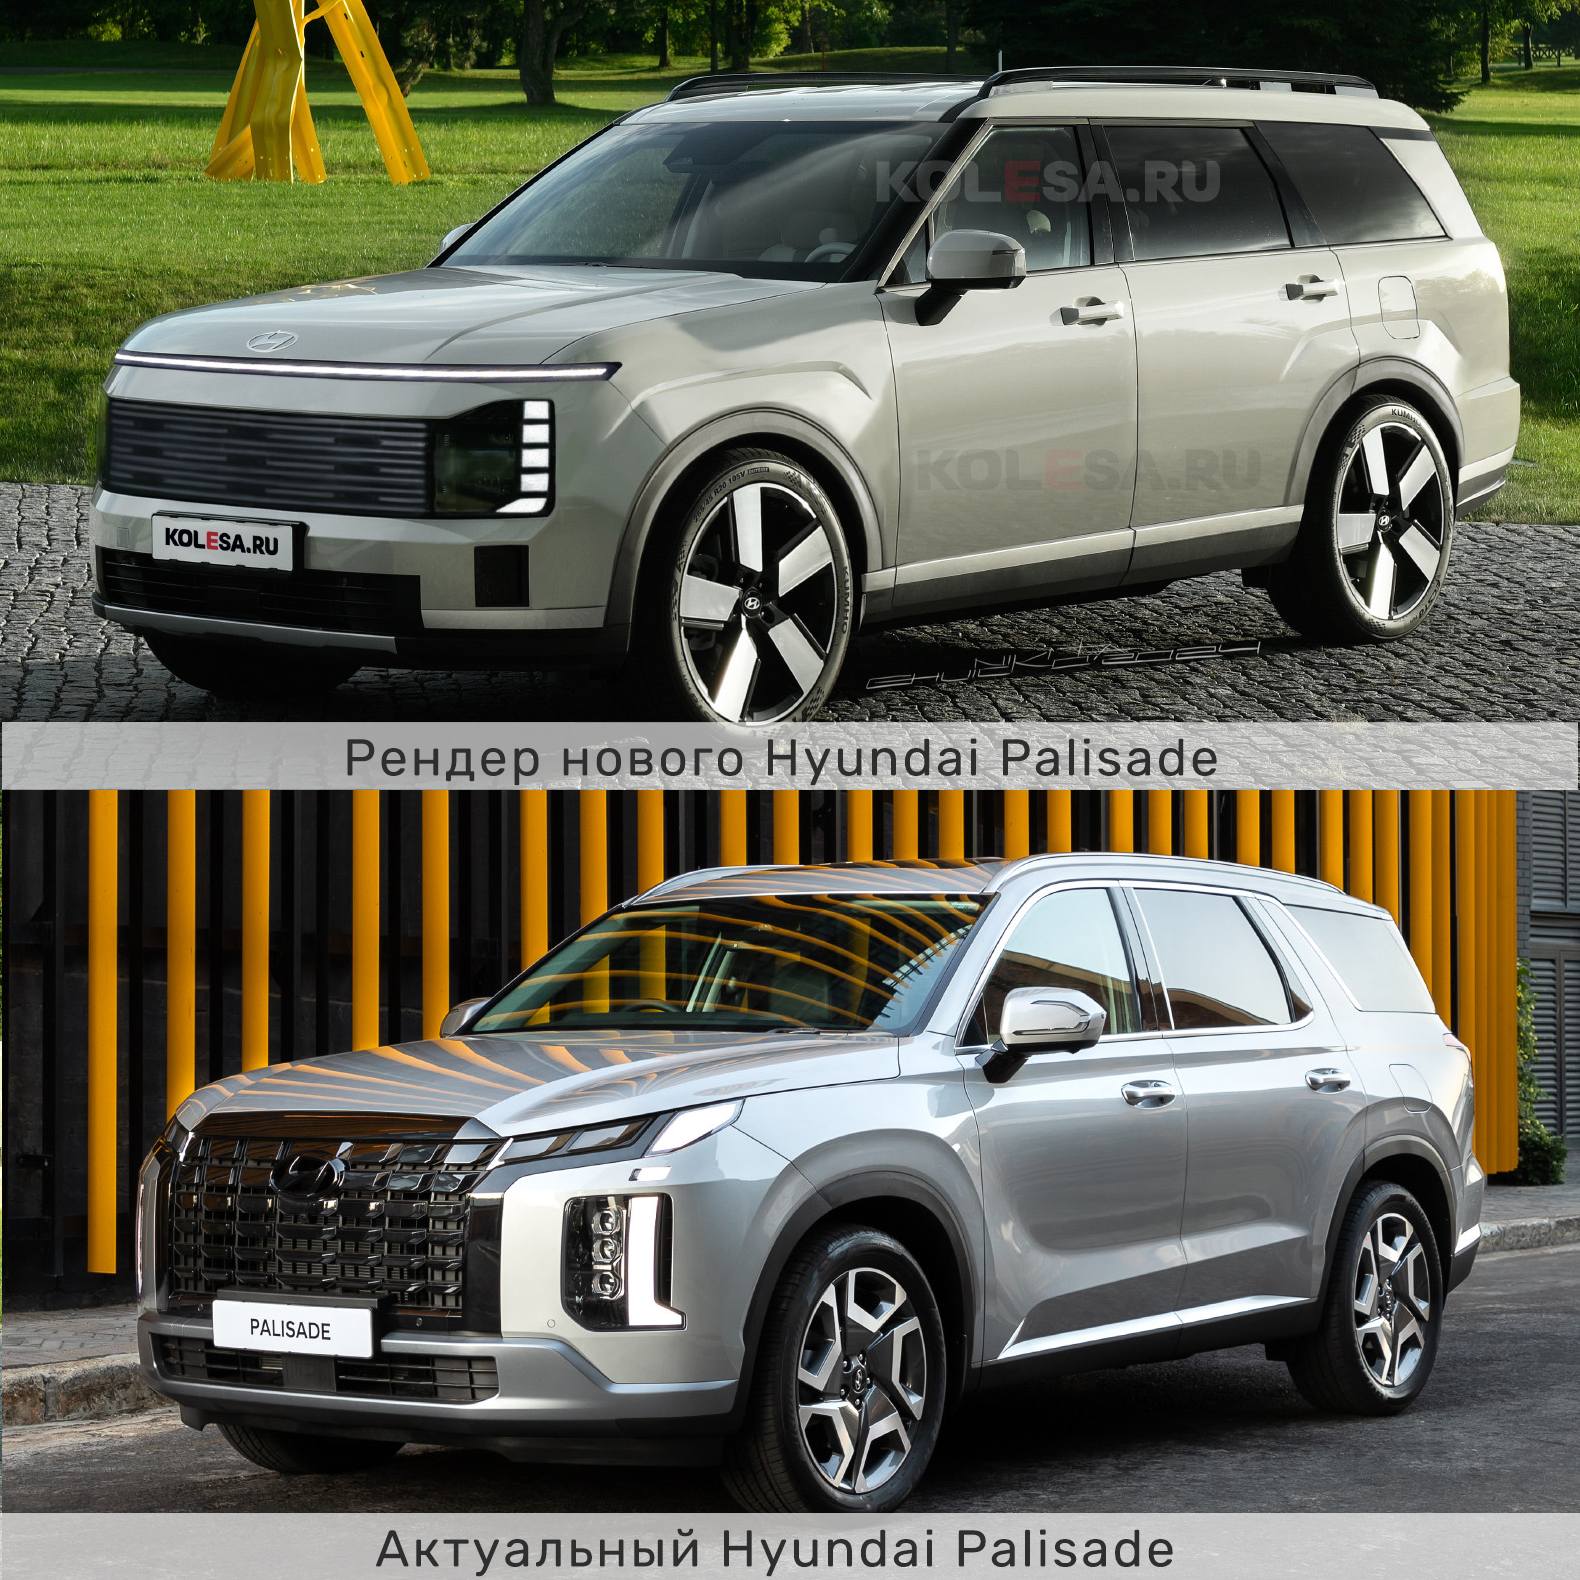 2026-hyundai-palisade-mid-size-cuv-debuts-across-fantasy-land-with-pixelated-styling_2.jpg